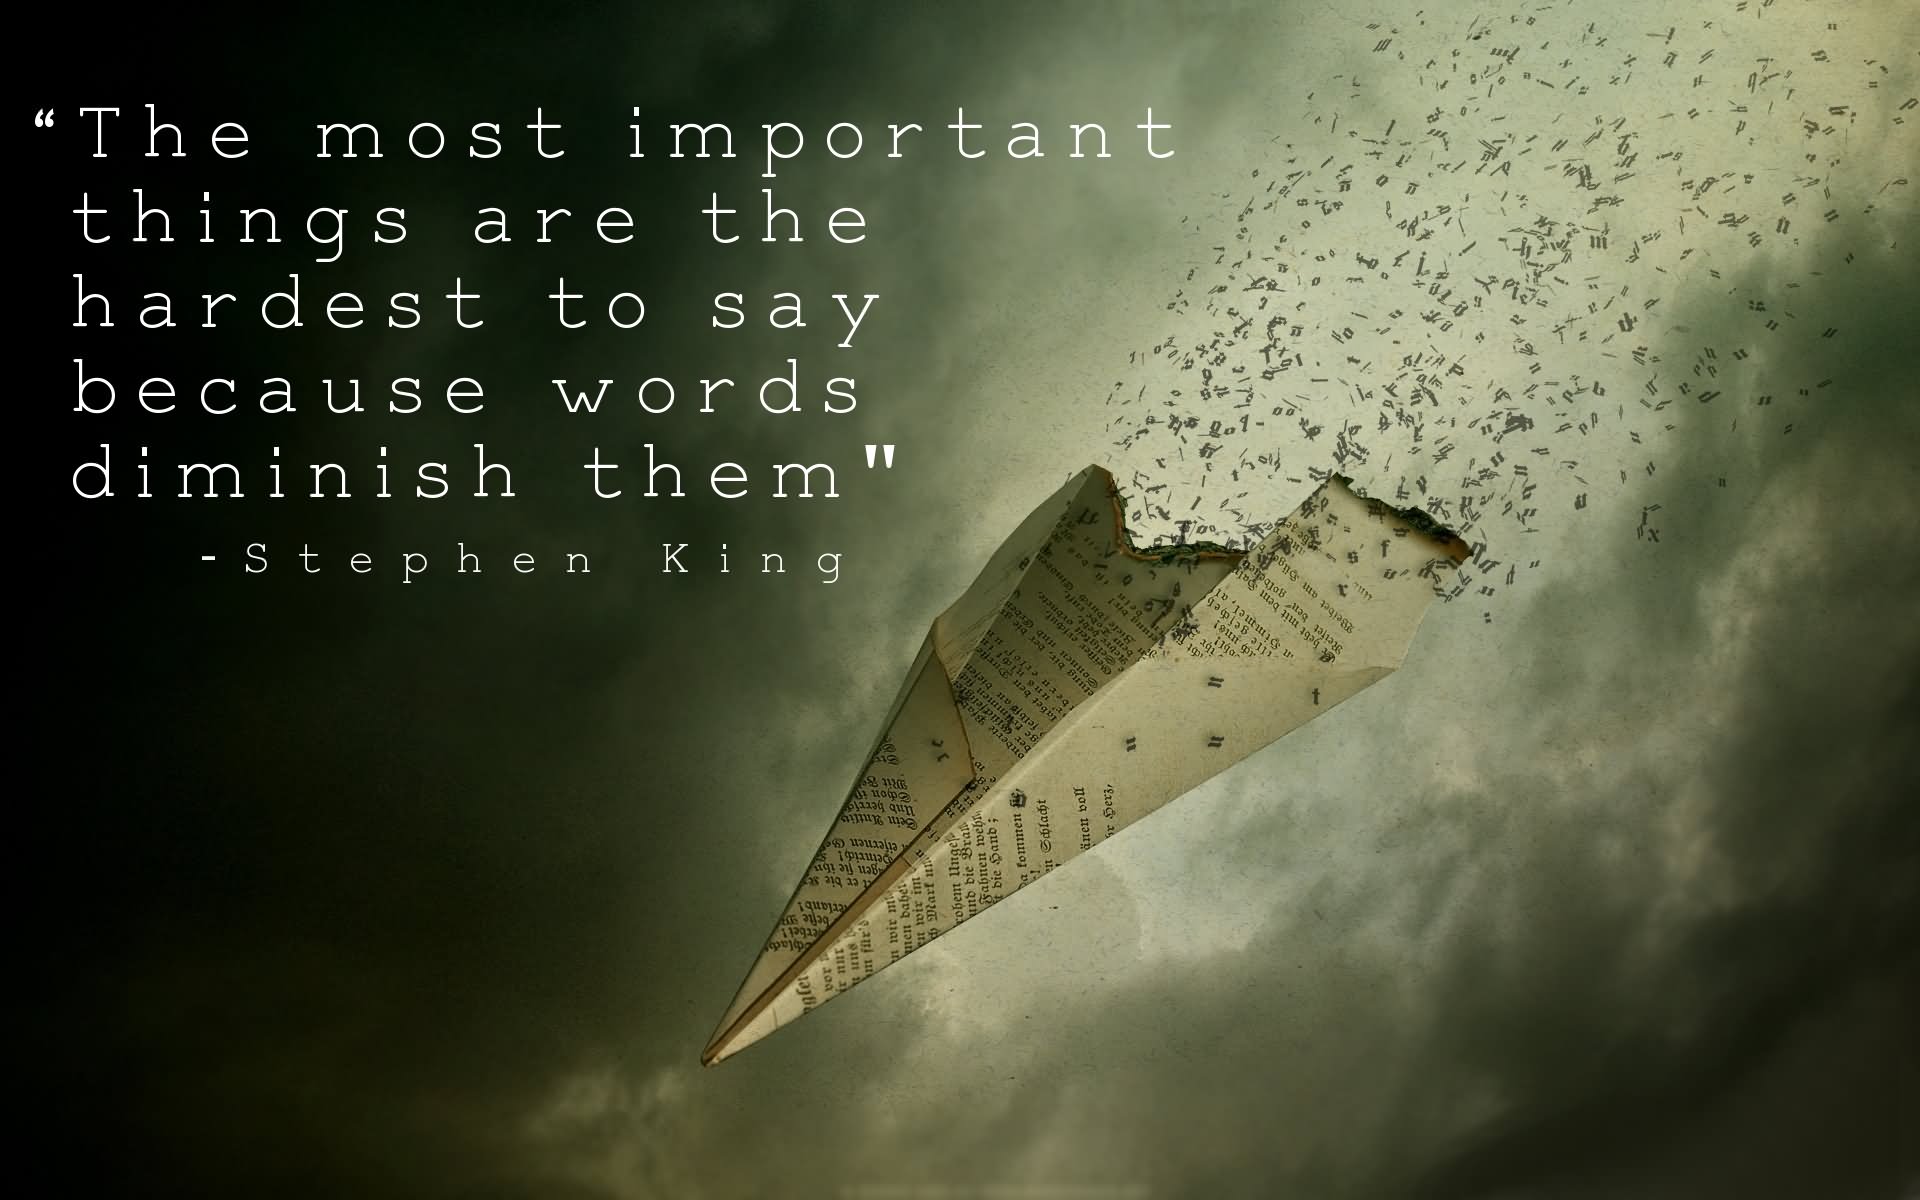 The most important things are the hardest to say, because words diminish them